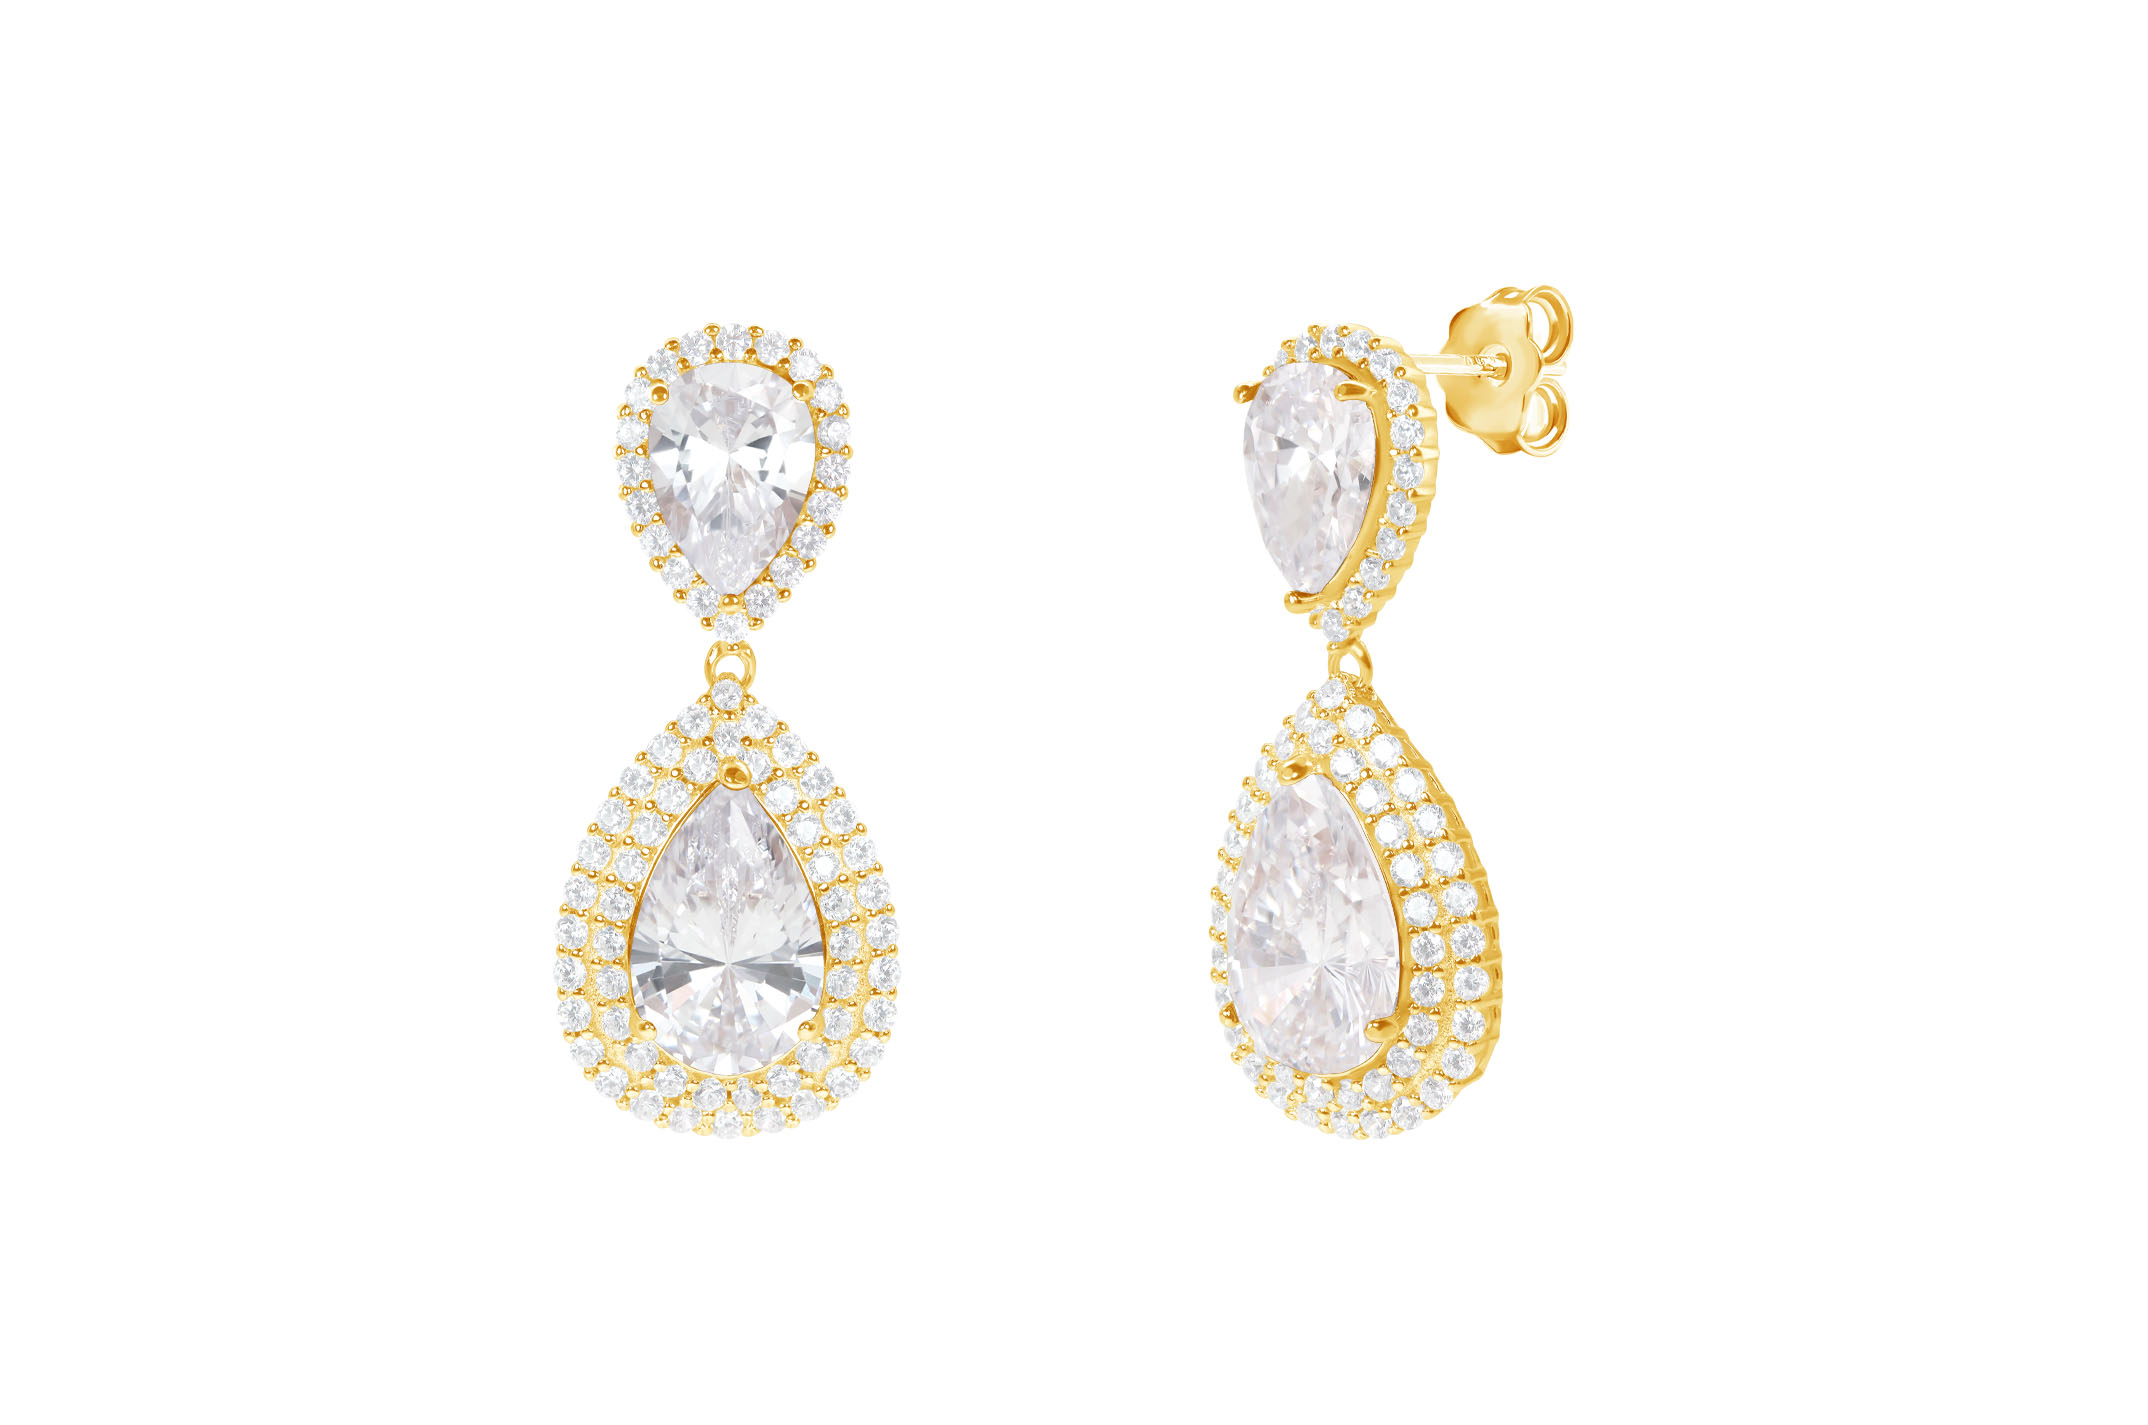 Jewel: earrings;Material: silver 925;Weight: 7.5 gr;Stone: zirconias;Color: yellow;Size: 3 cm;Gender: woman